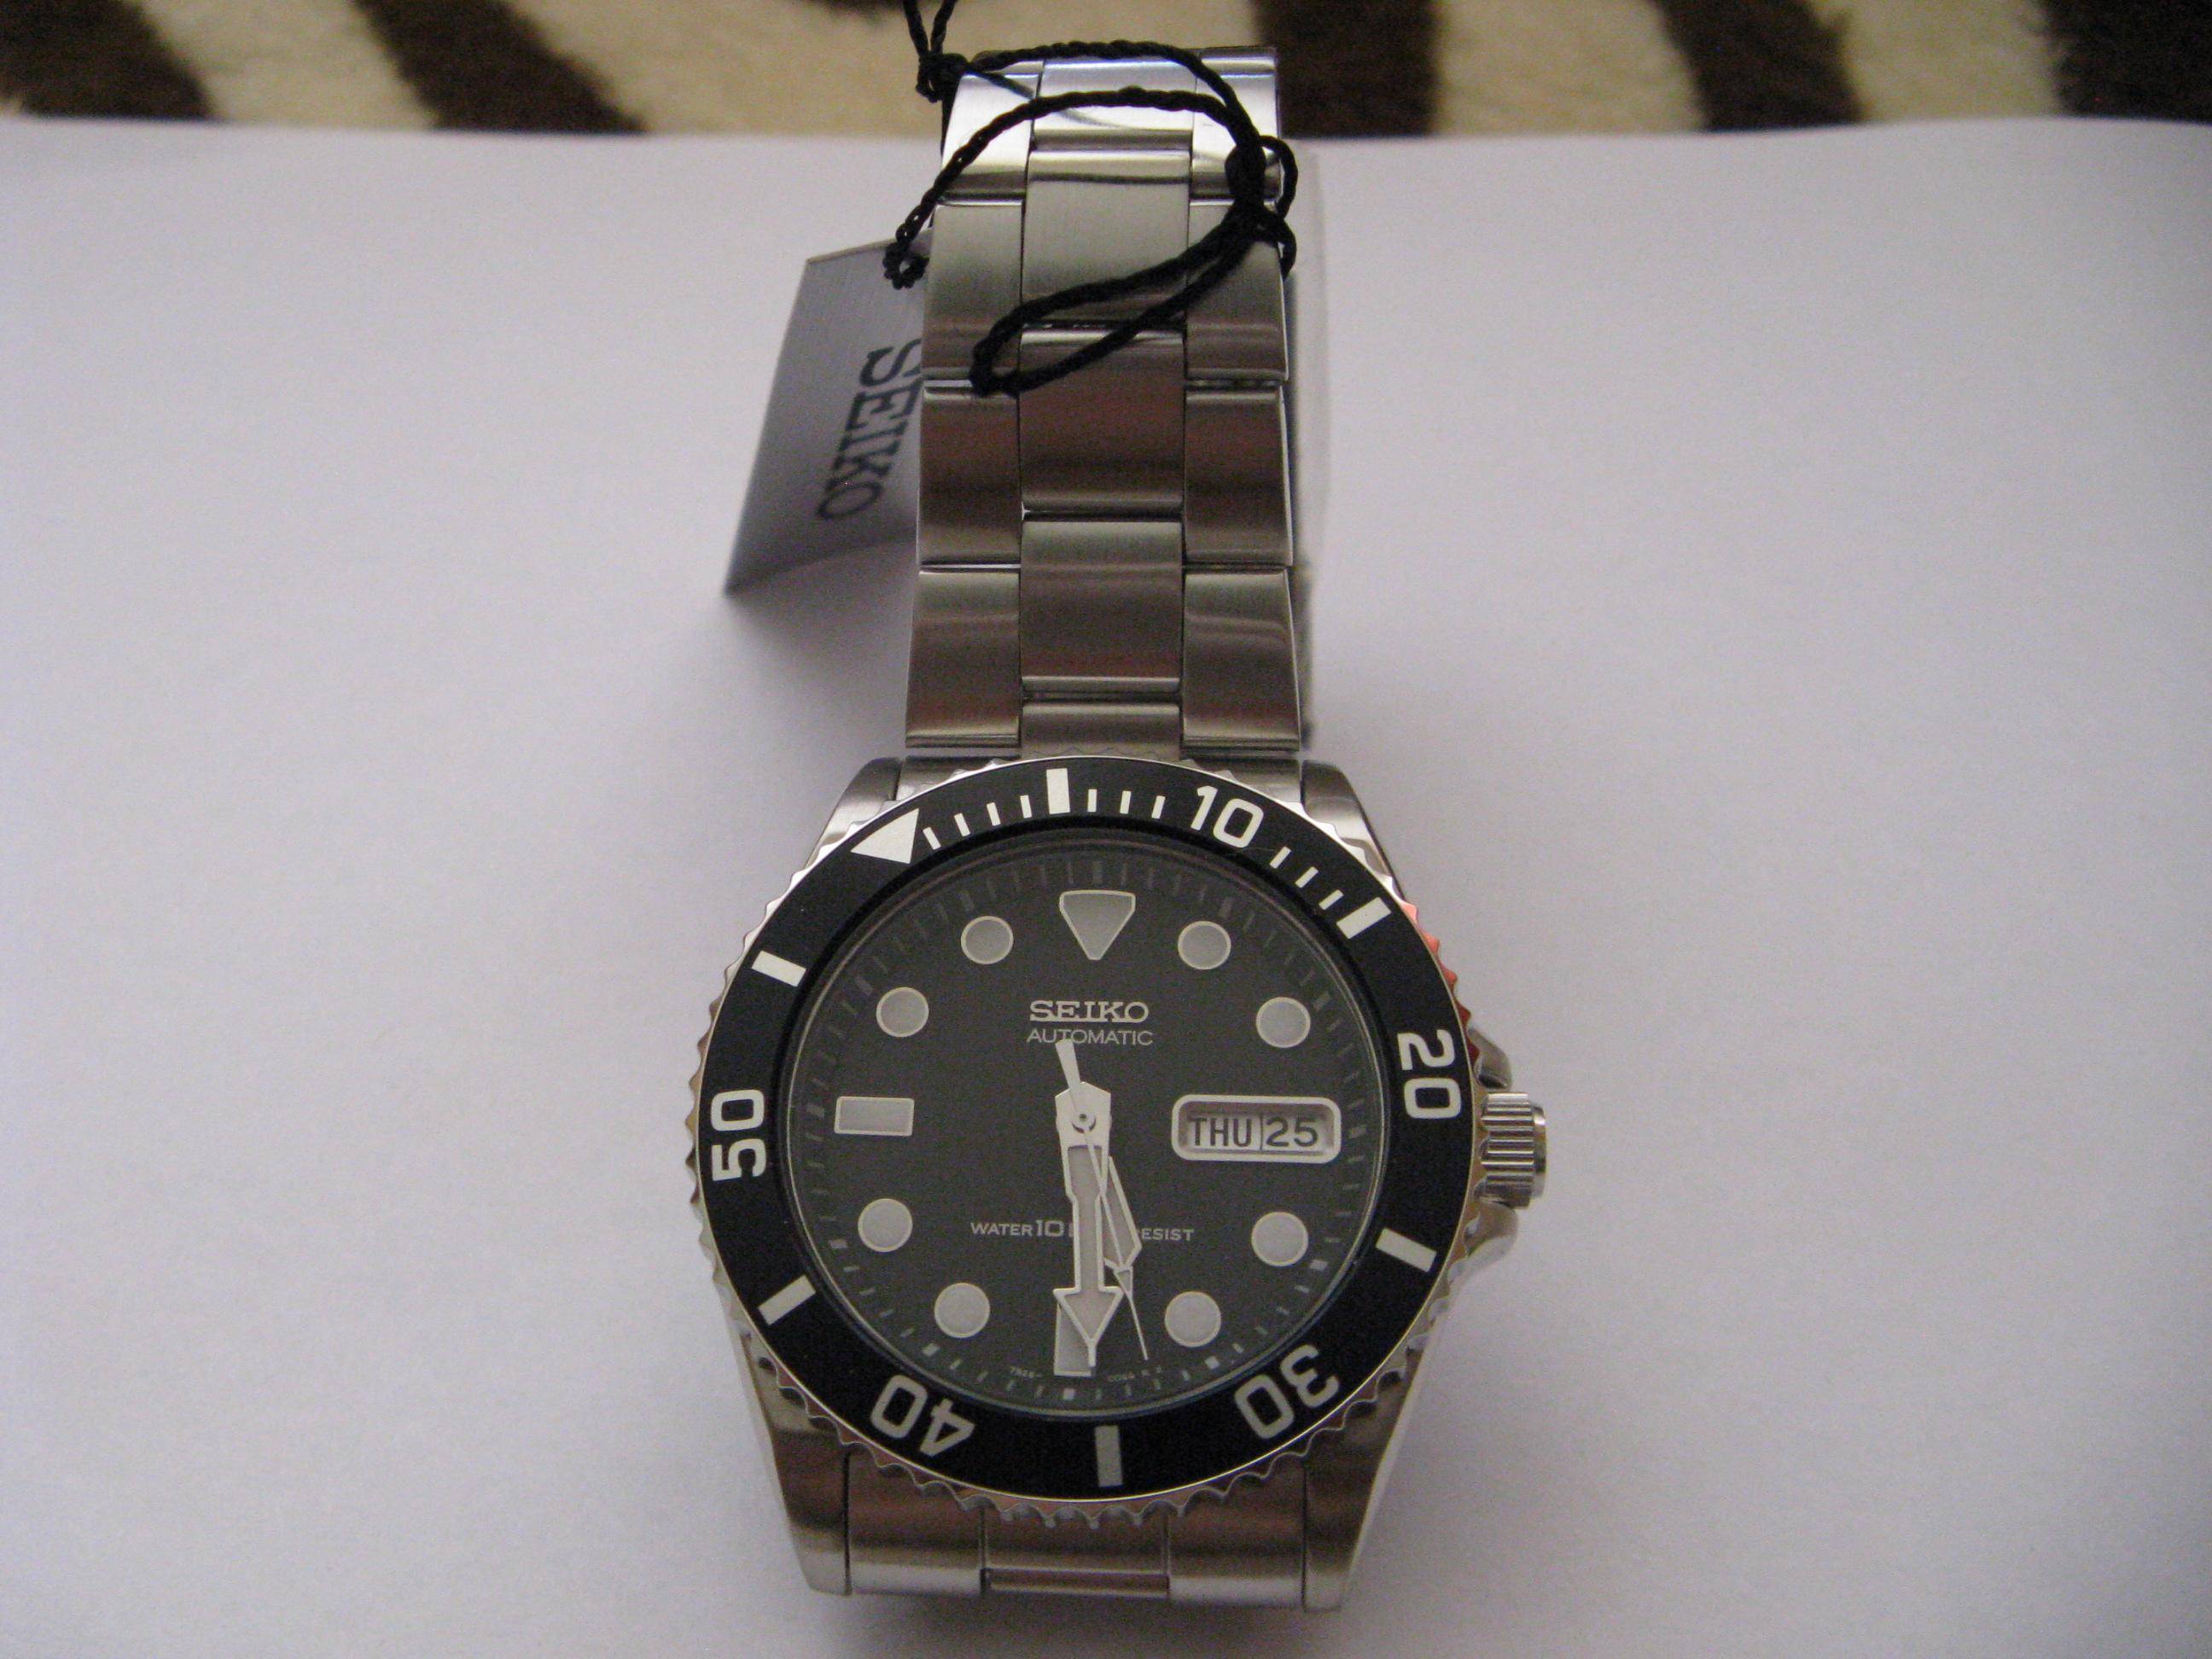 Seiko Automatic Diver's Mid-size SKX031 ) - ChronoTales